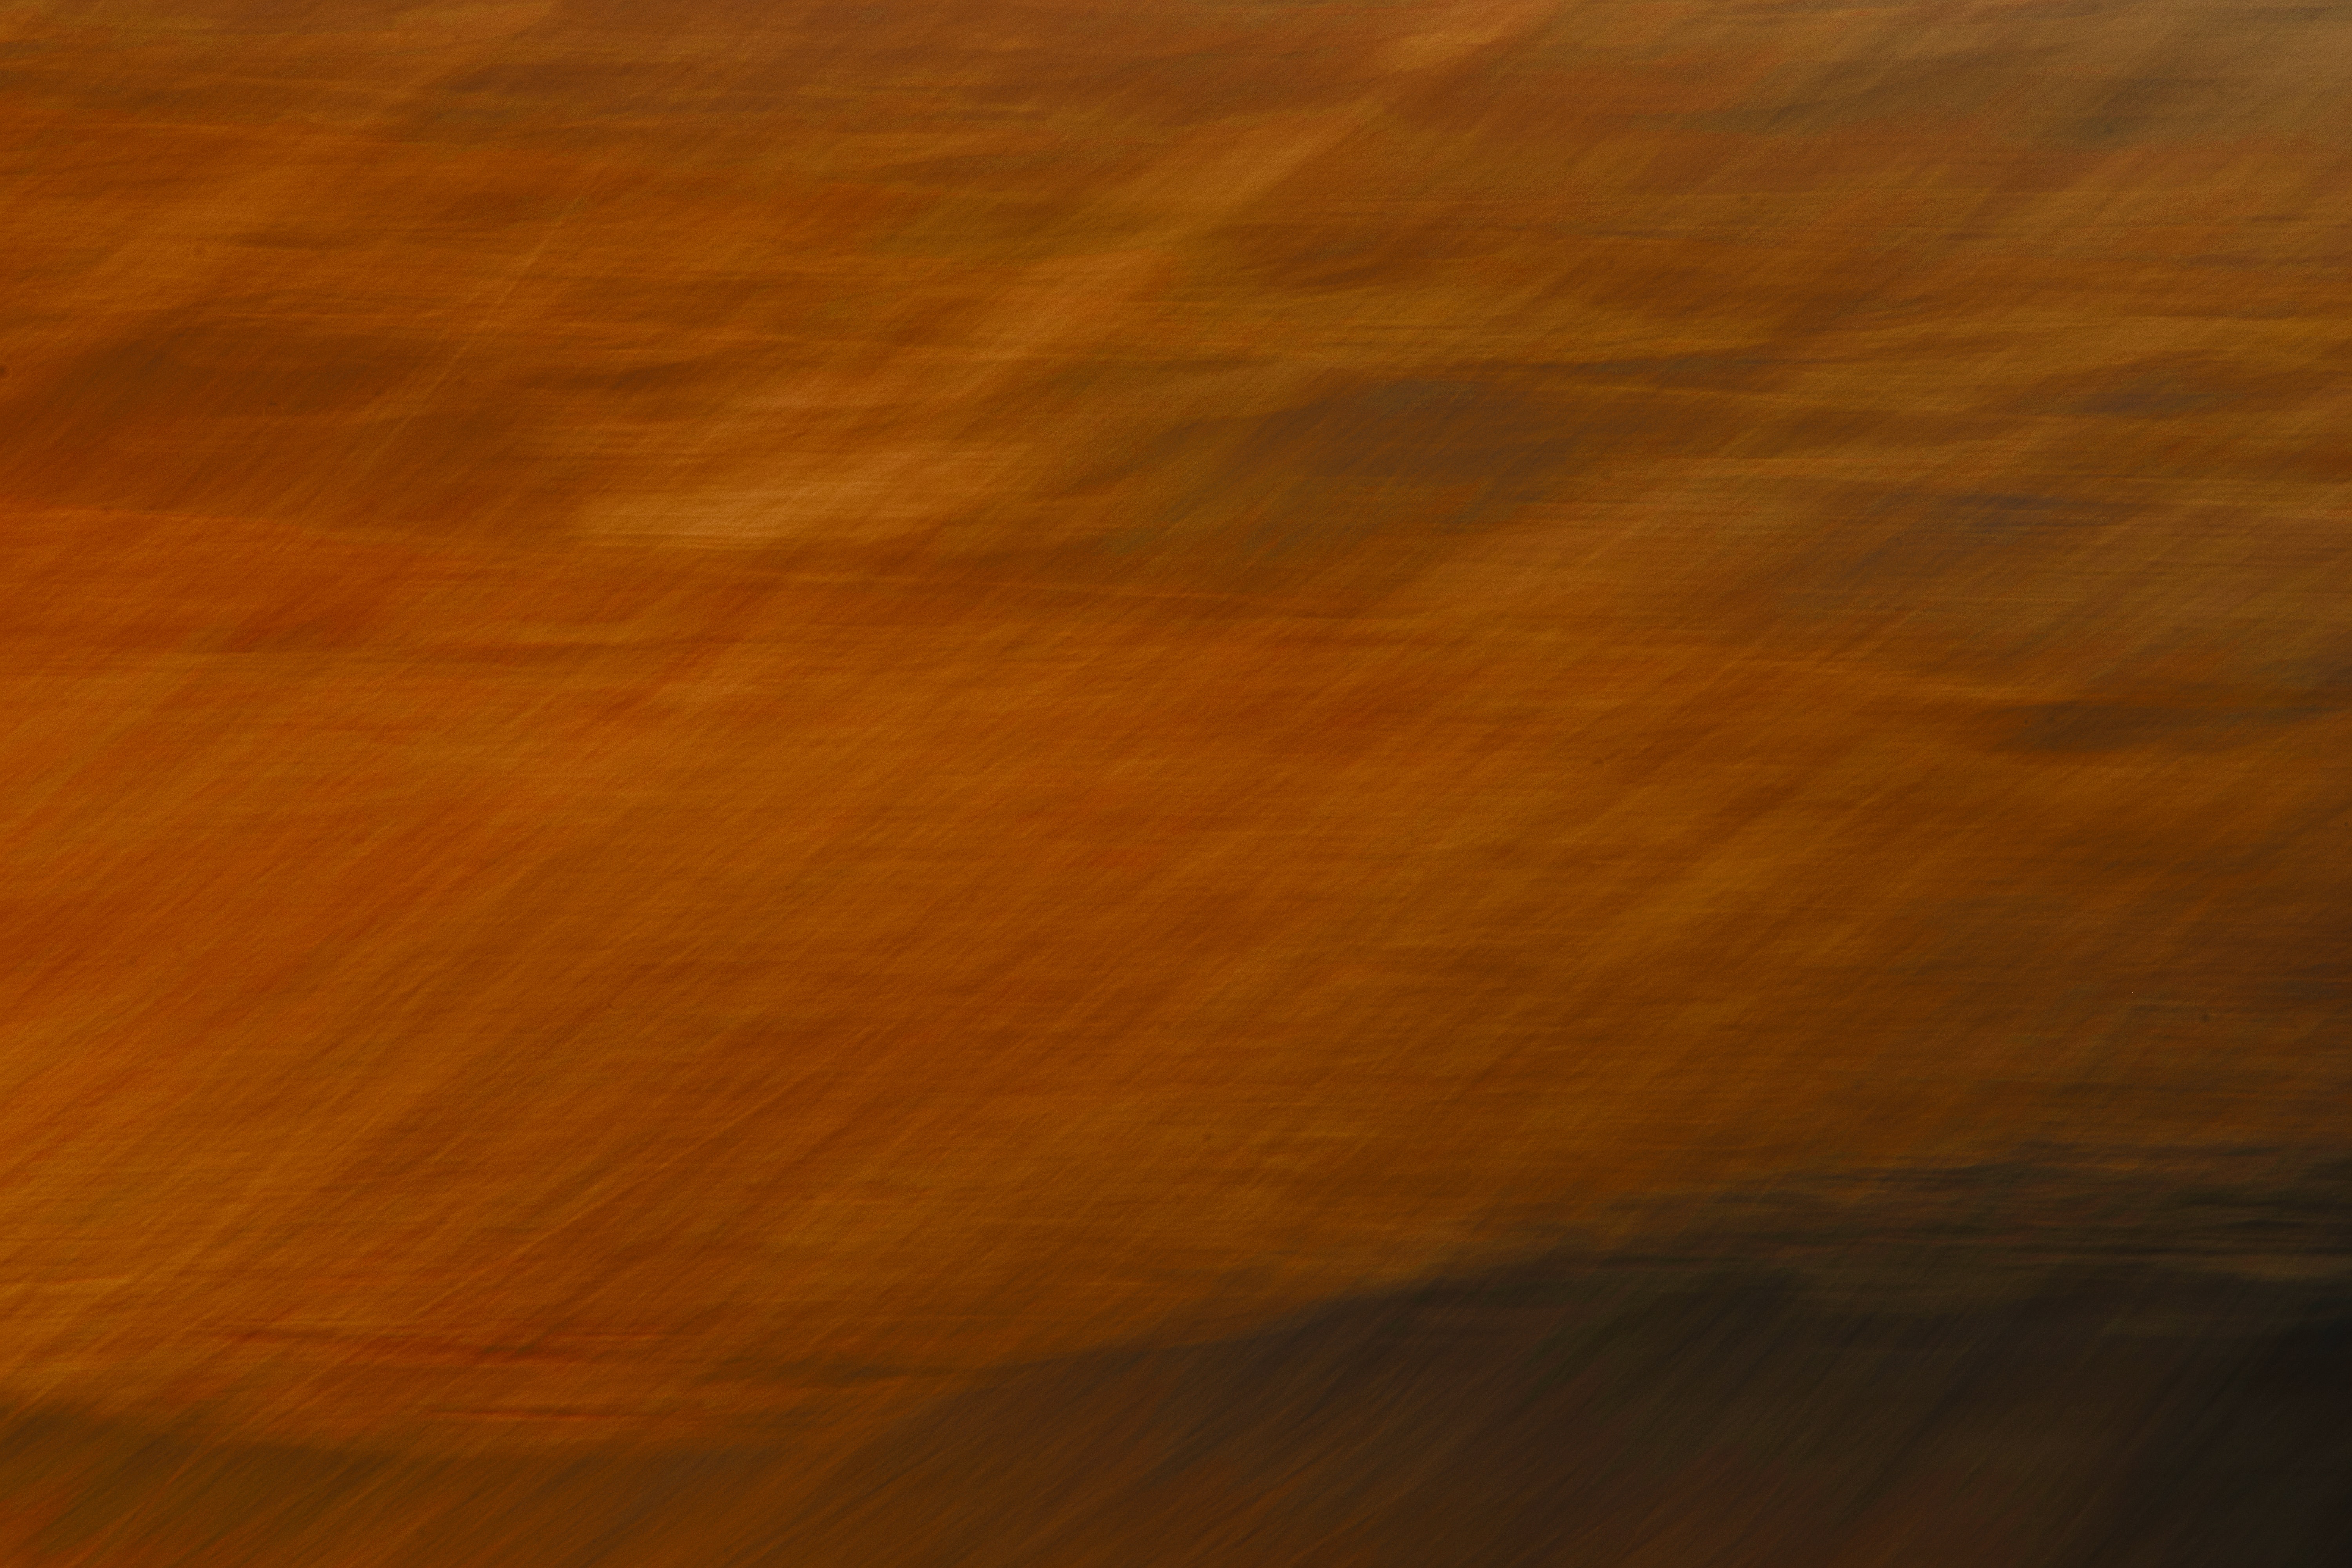 brown, blur, background, abstract, smooth UHD